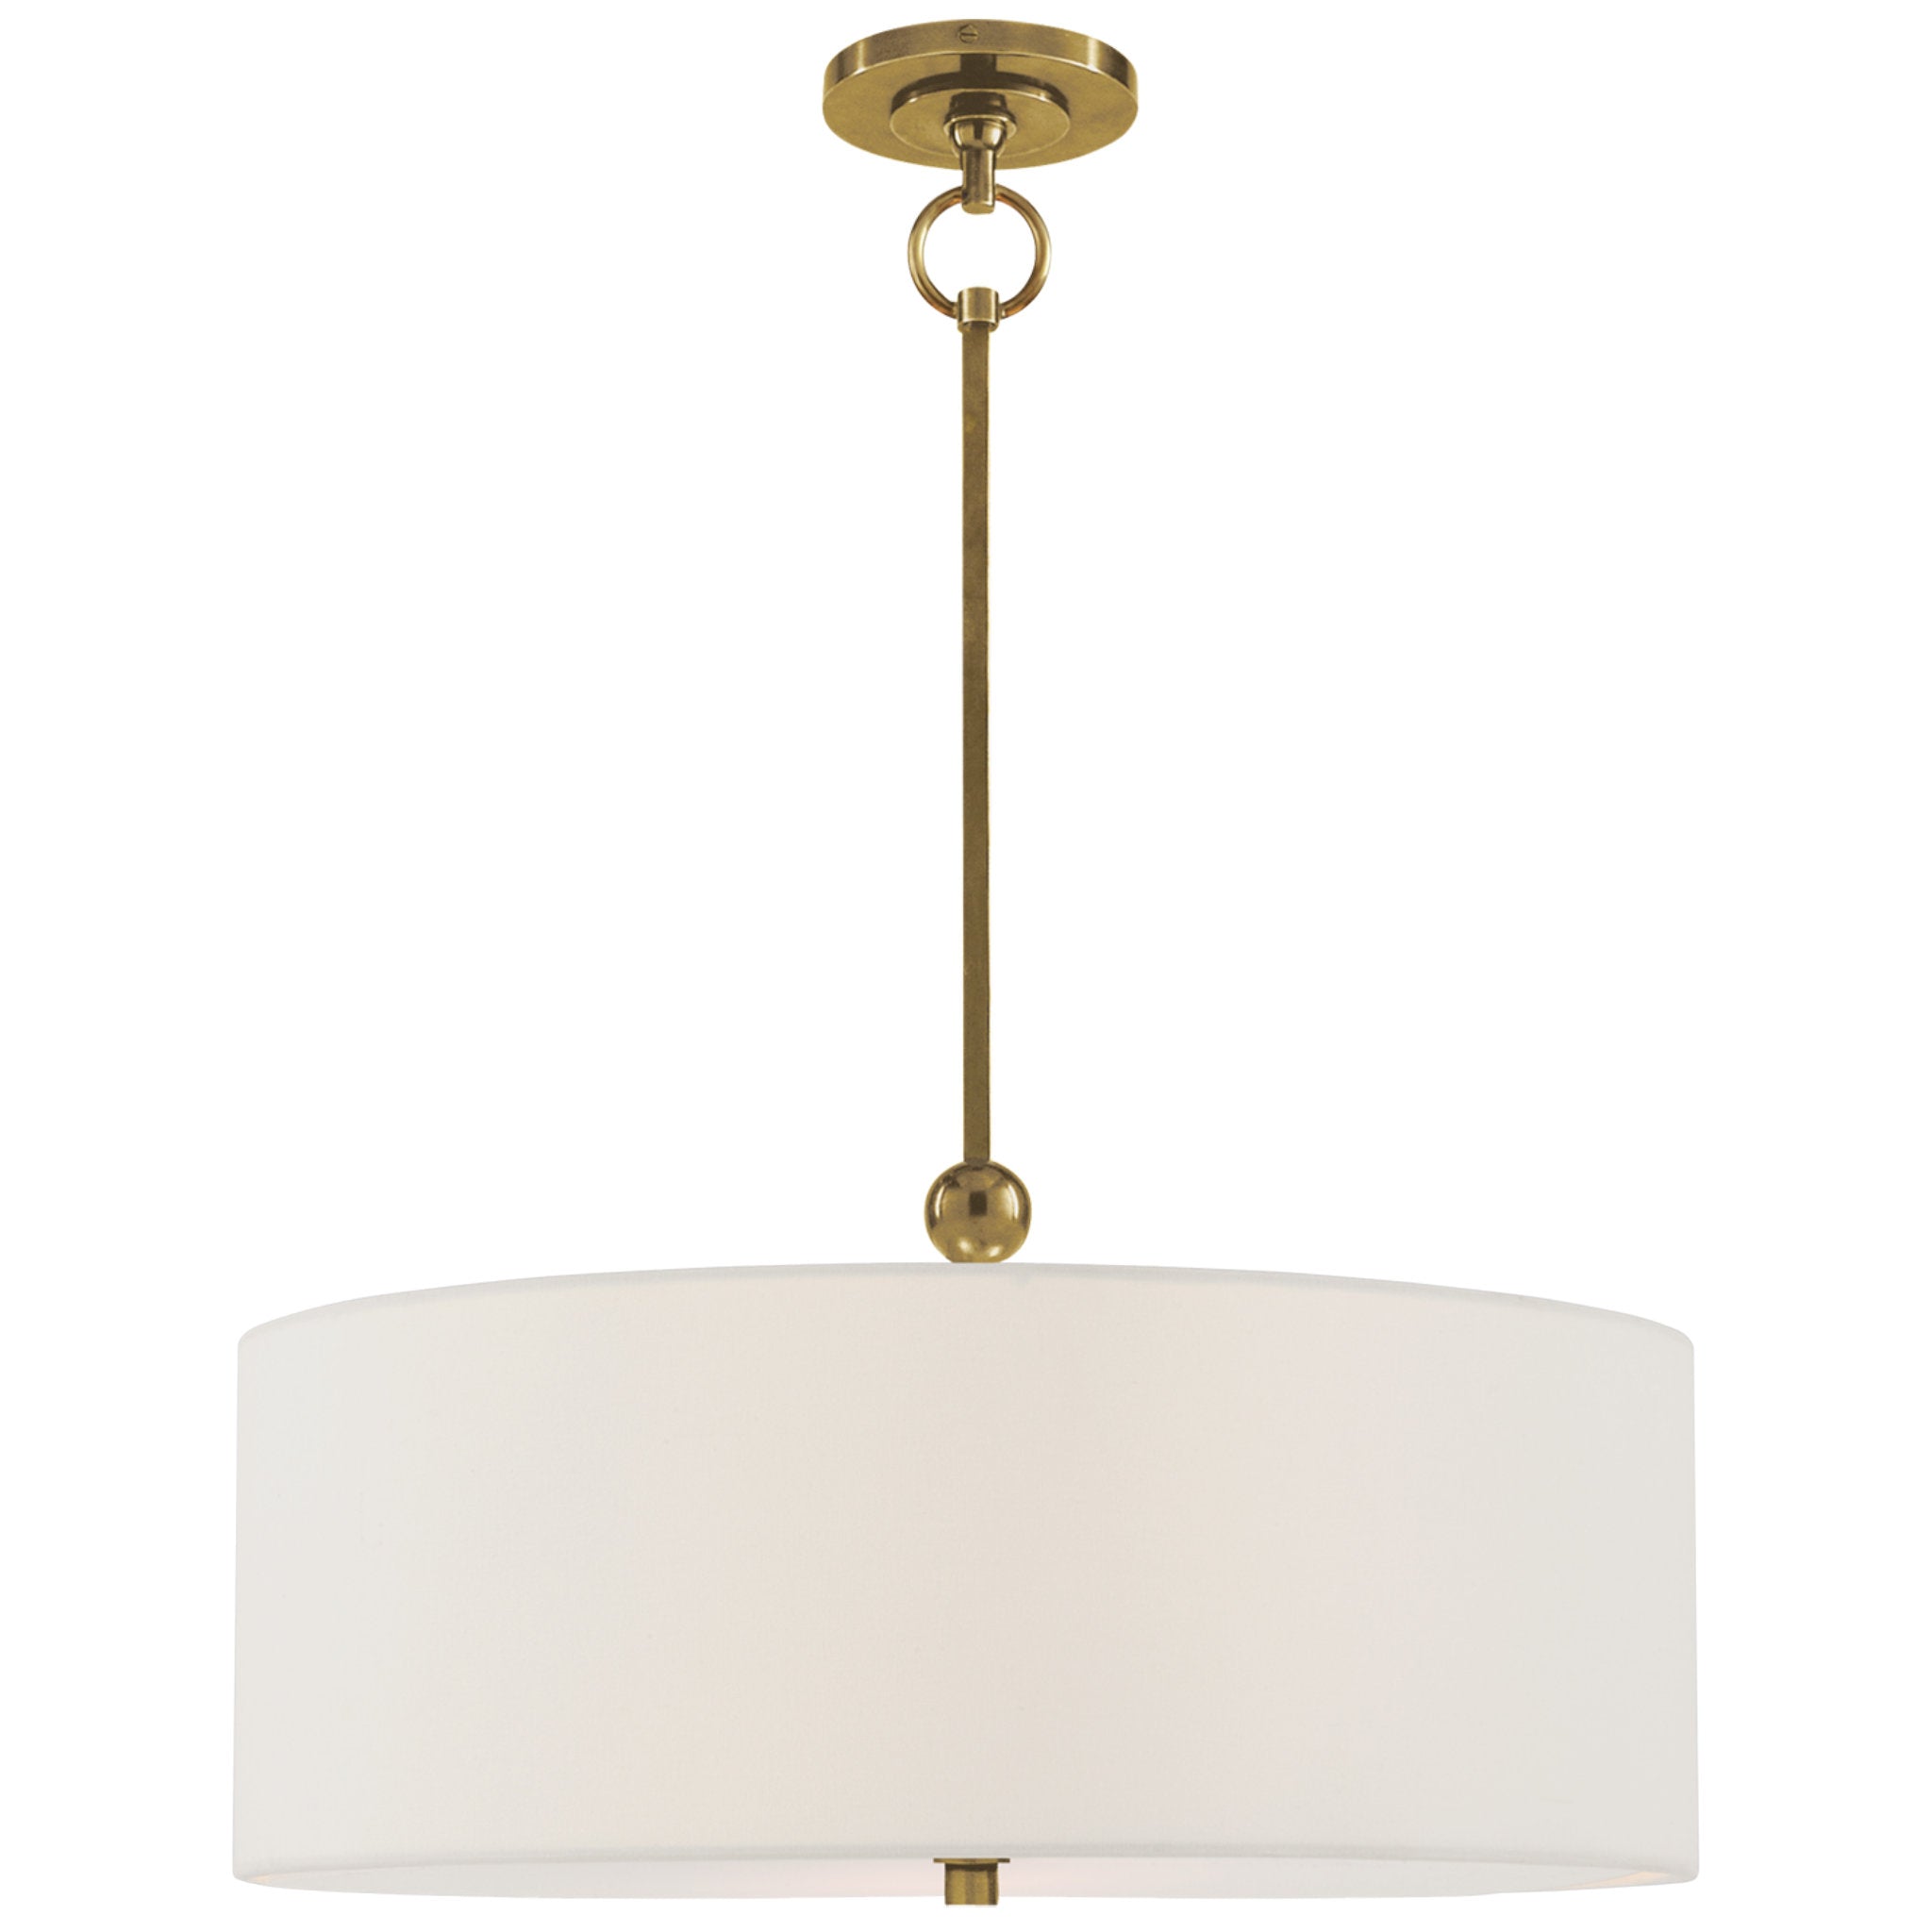 Thomas O'Brien Reed Hanging Shade in Hand-Rubbed Antique Brass with Linen Shade